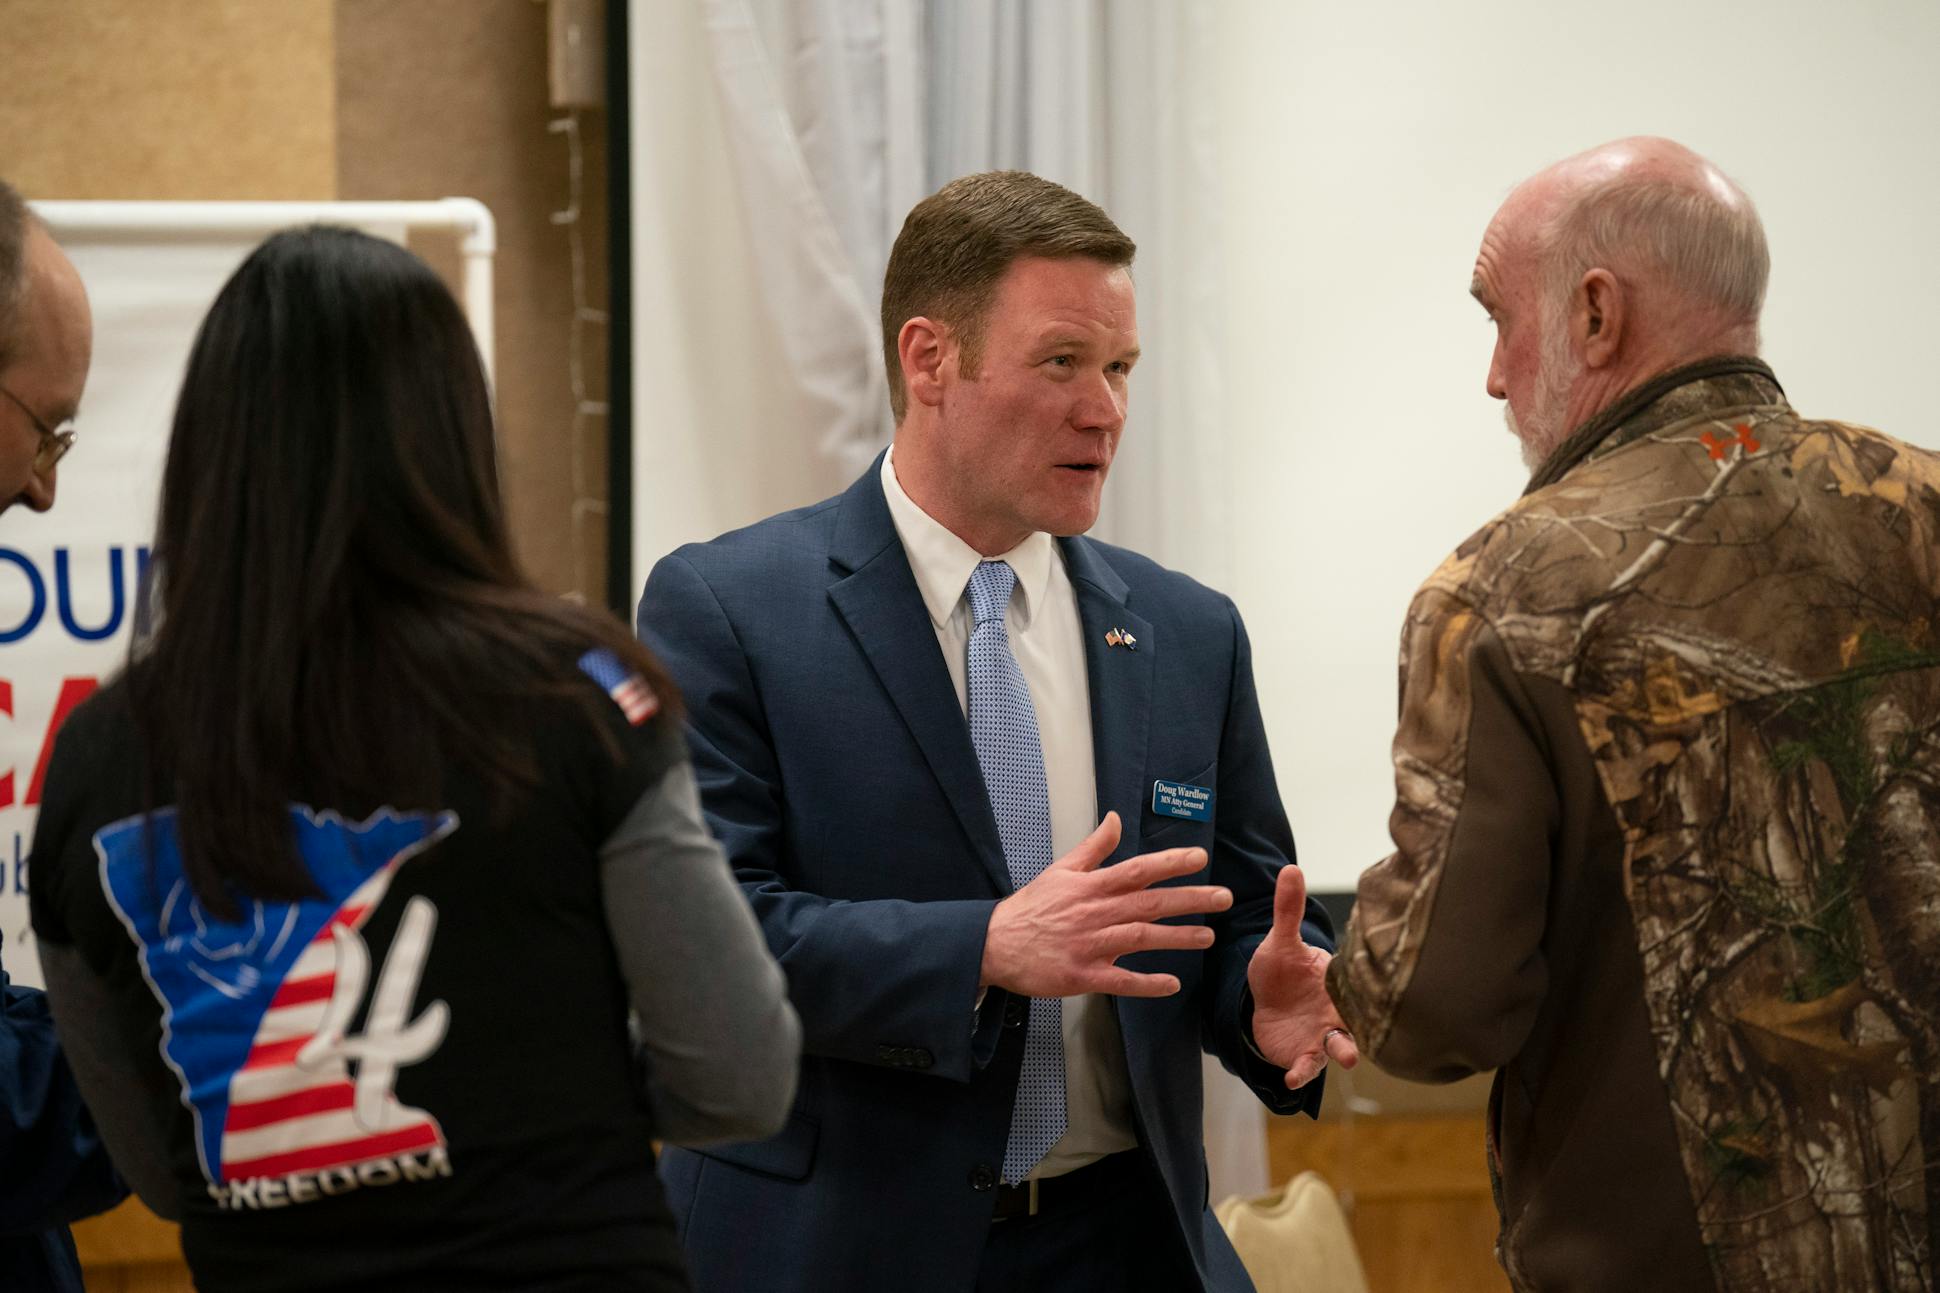 Doug Wardlow visited with attendees after a forum featuring four Republican candidates for Minnesota attorney general at the Owatonna VFW.